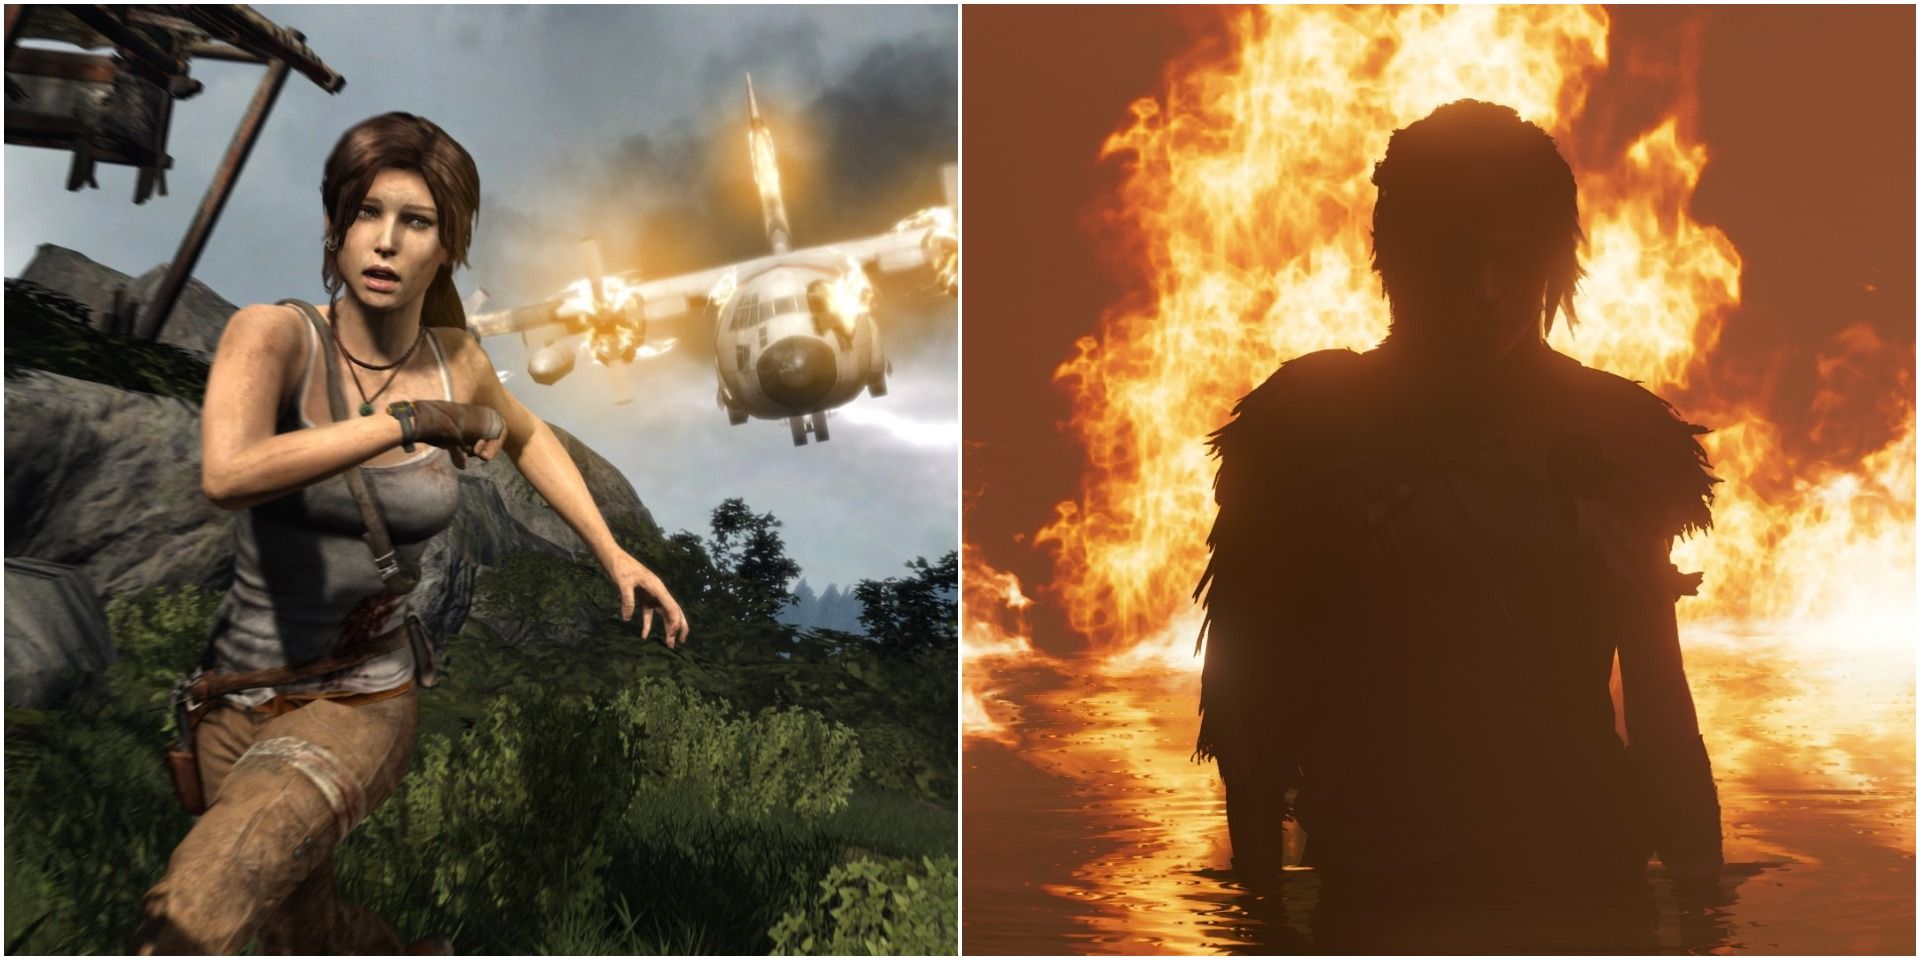 A collage showing action scenes in the Tomb Raider series